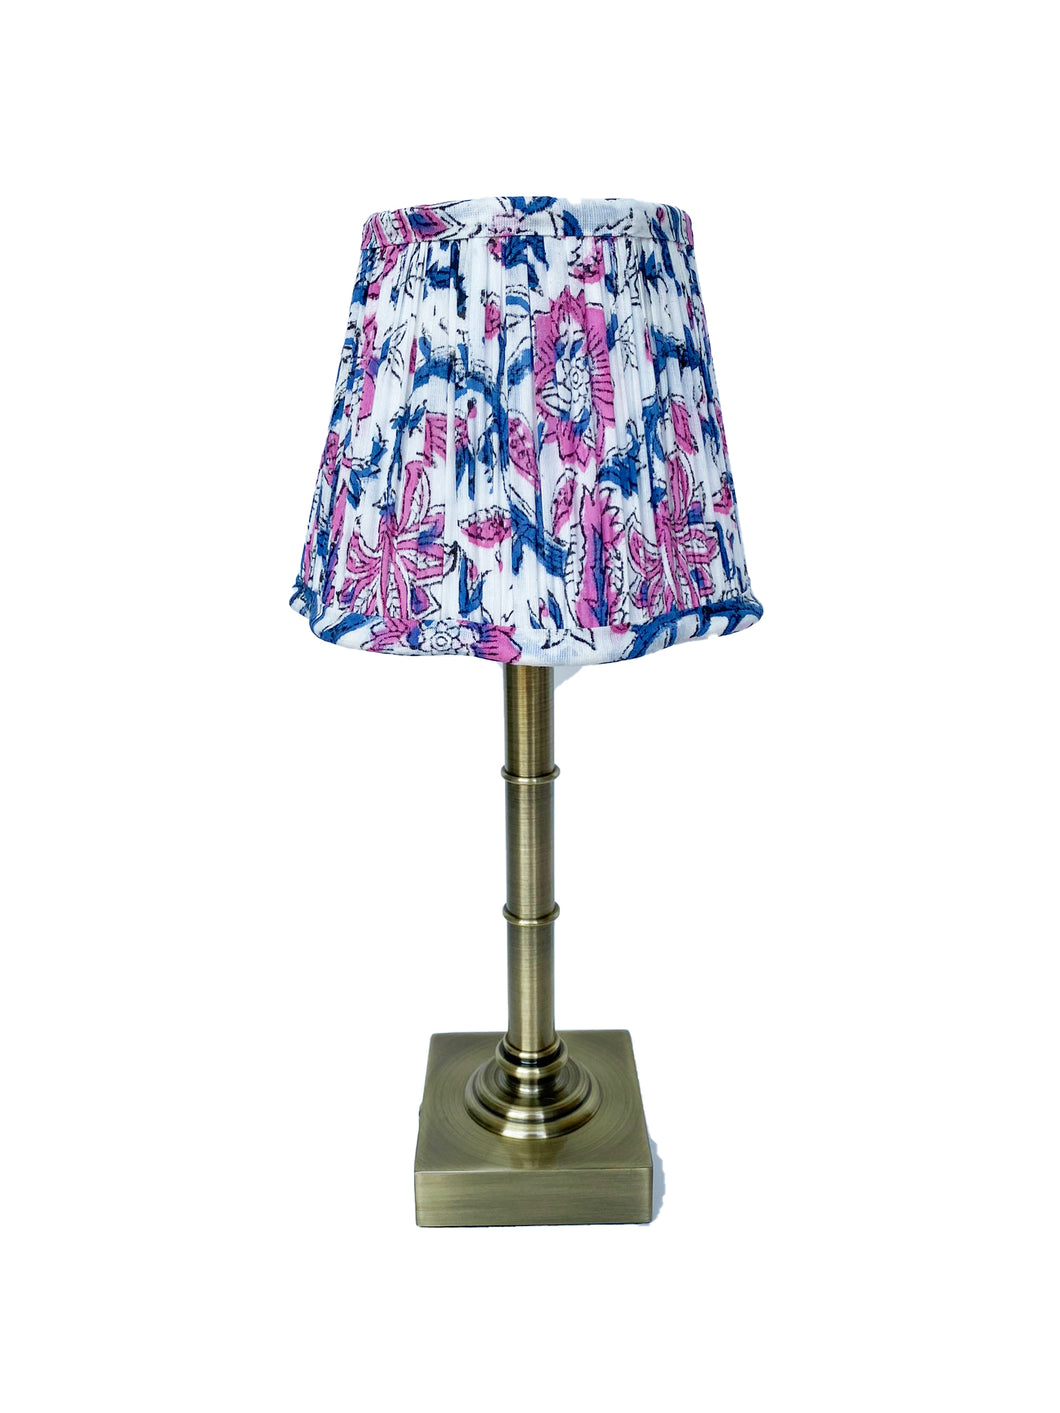 16cm pink & blue scalloped lampshade